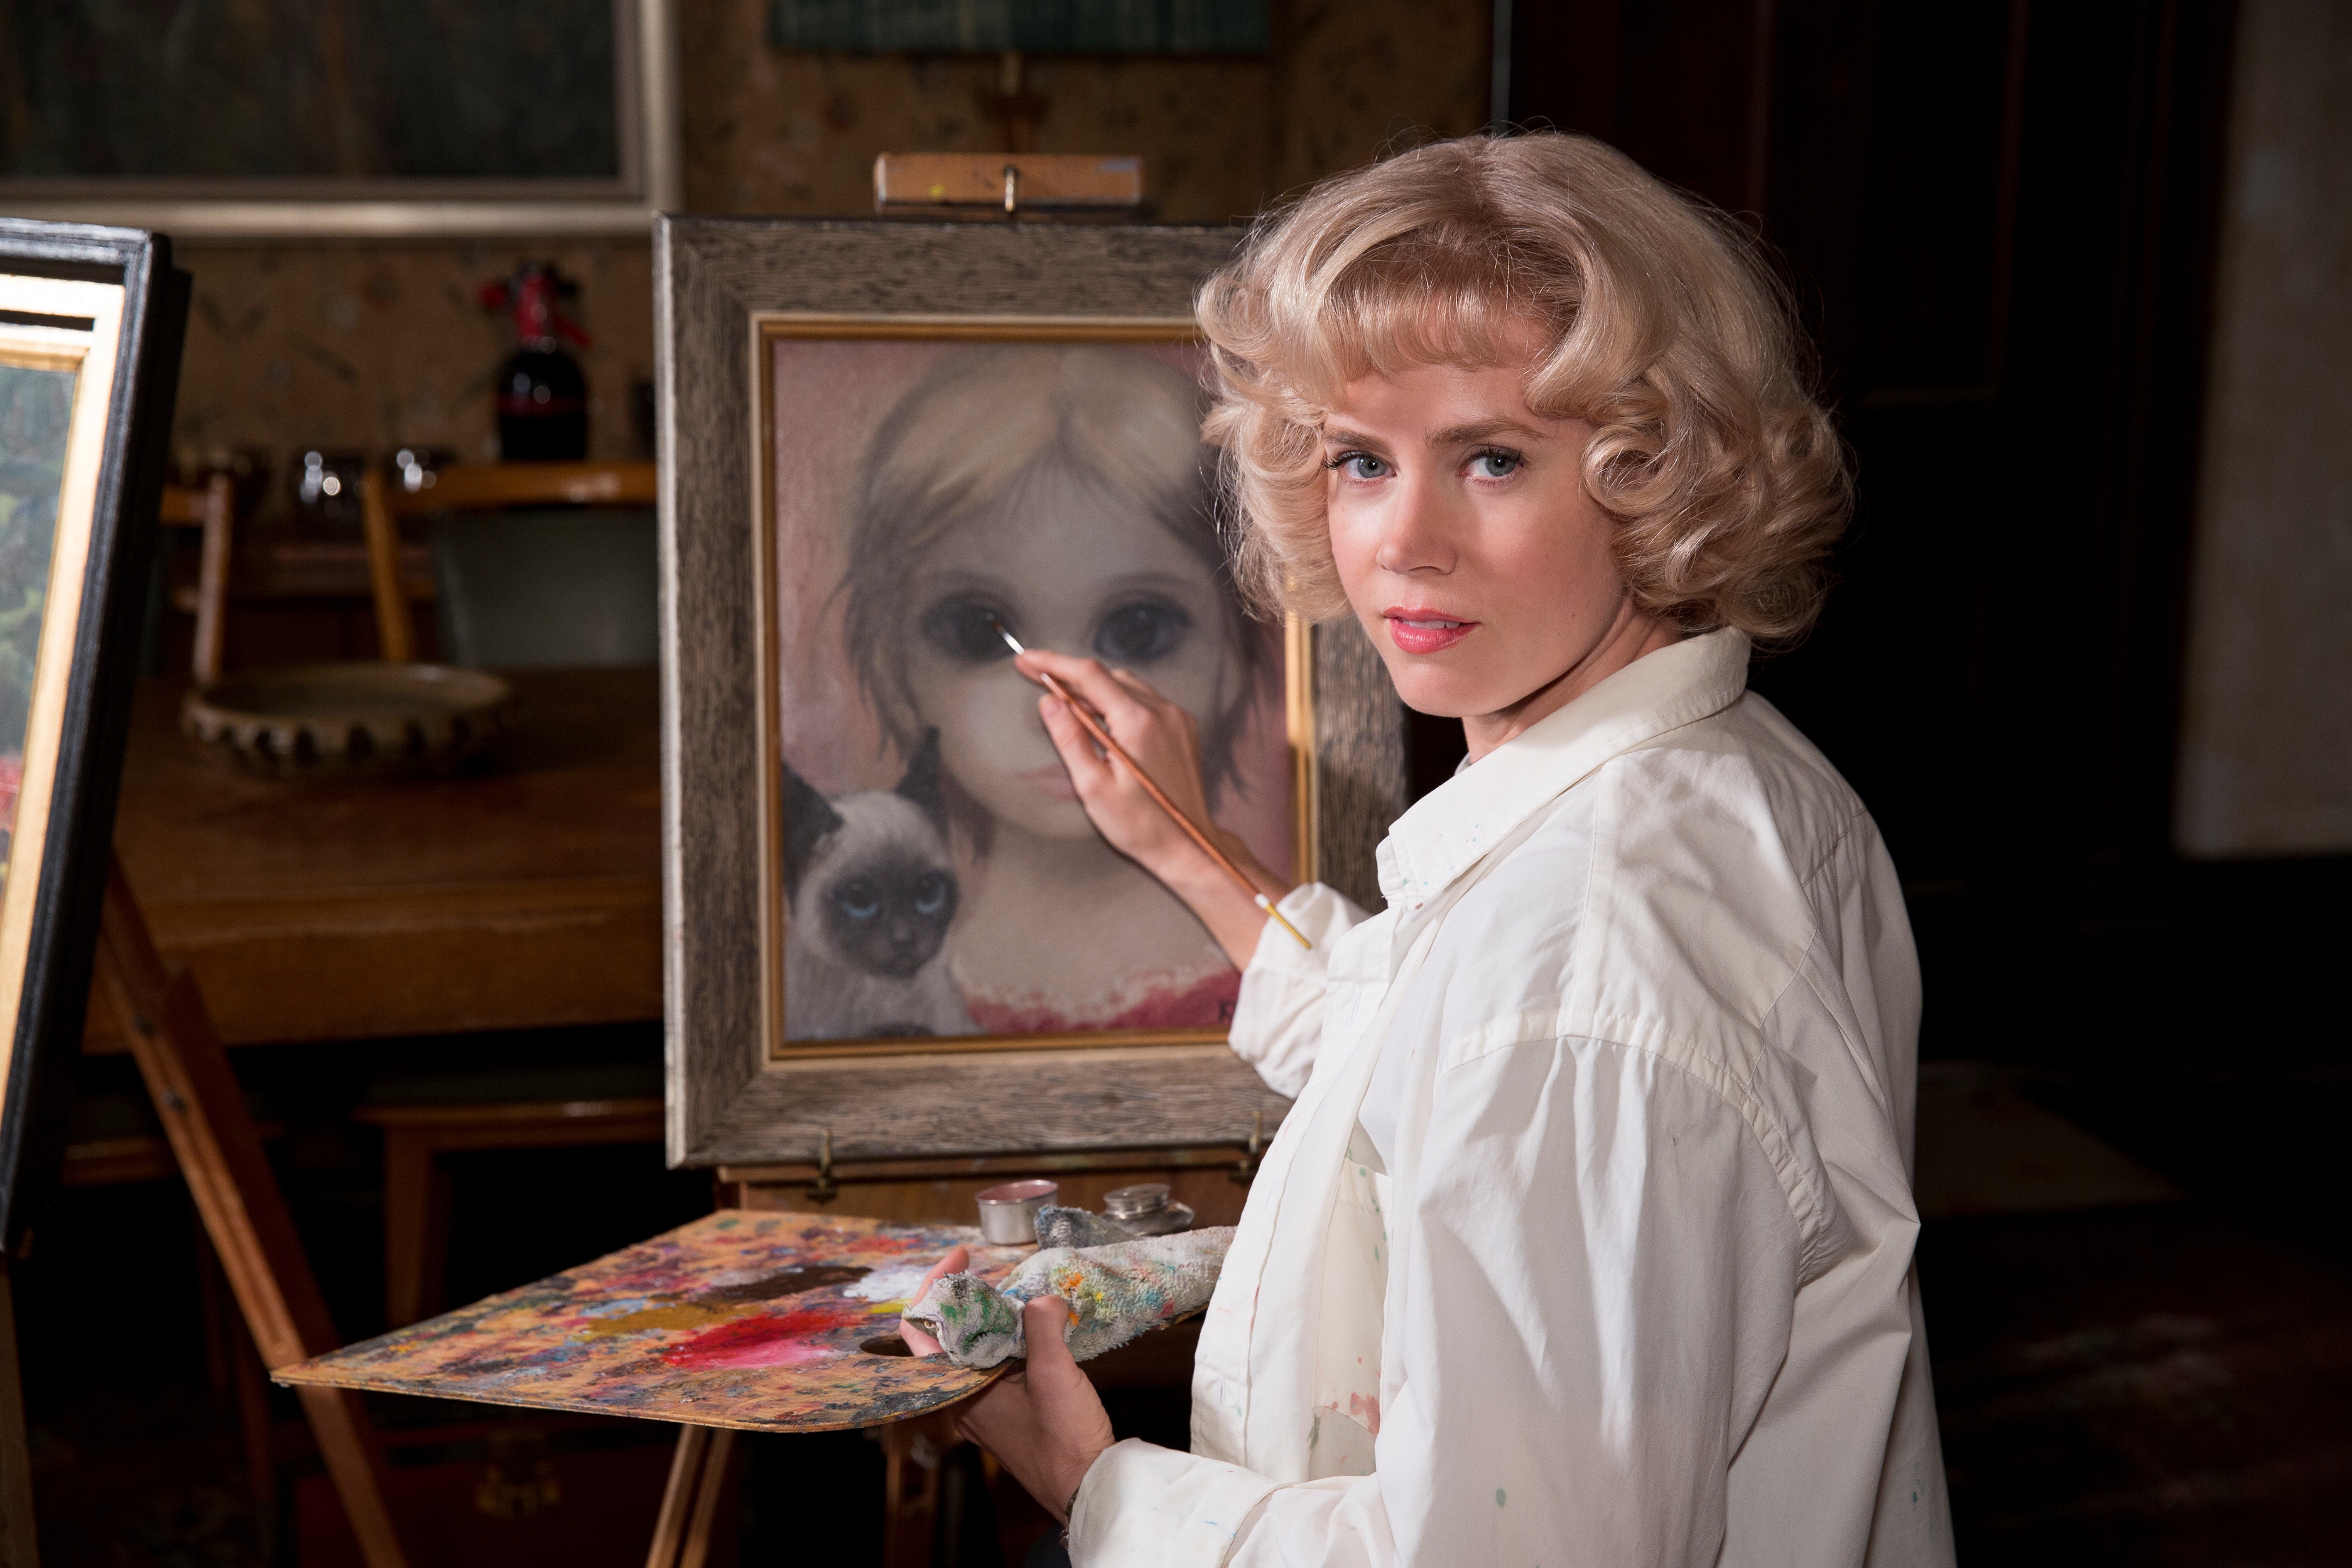 Big Eyes True Story Behind the Films Starring Amy Adams Time image pic